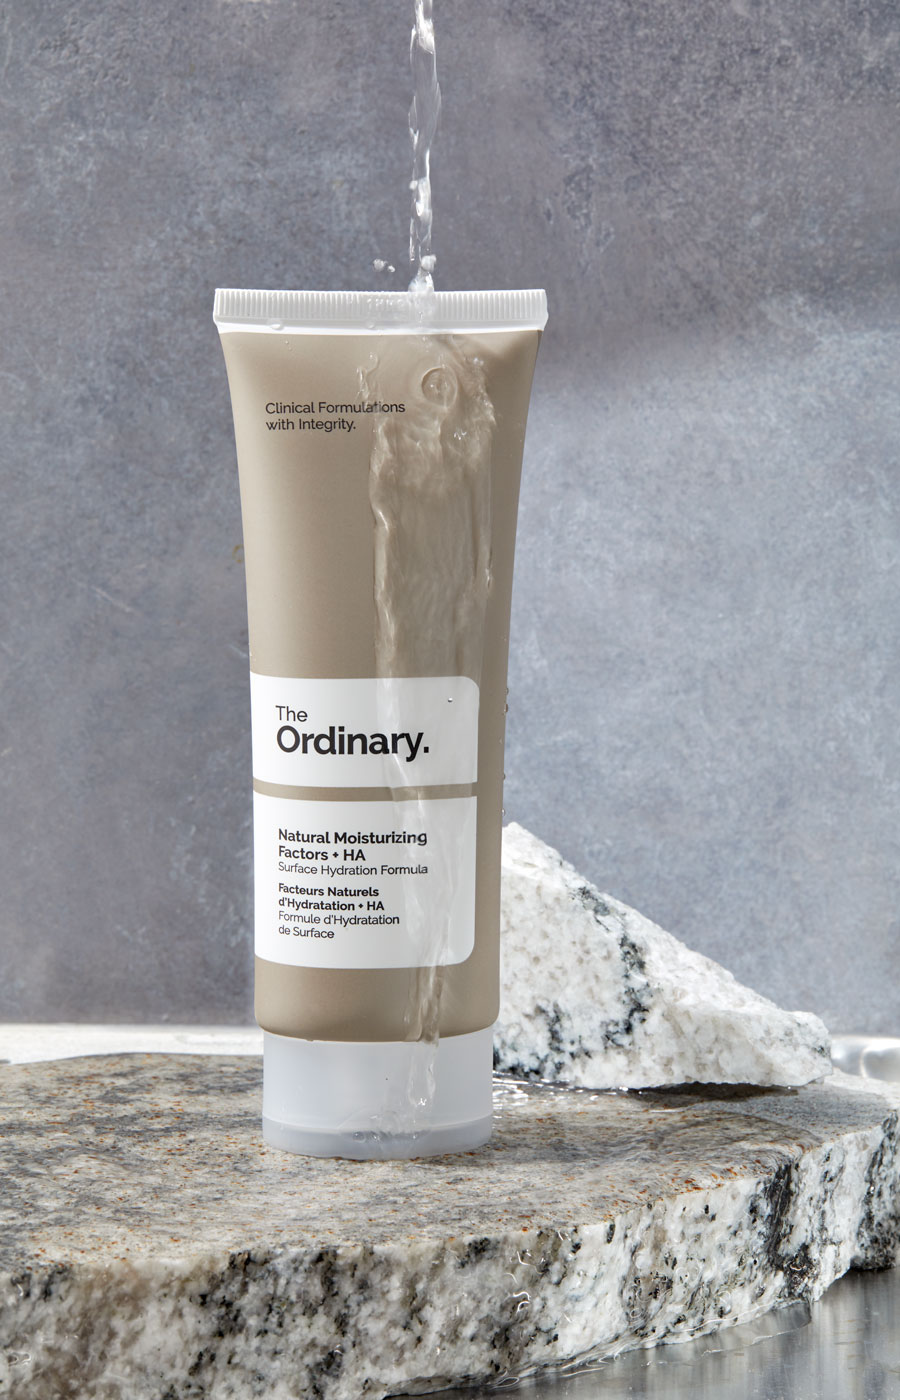 The Ordinary skincare cleanser with water splash